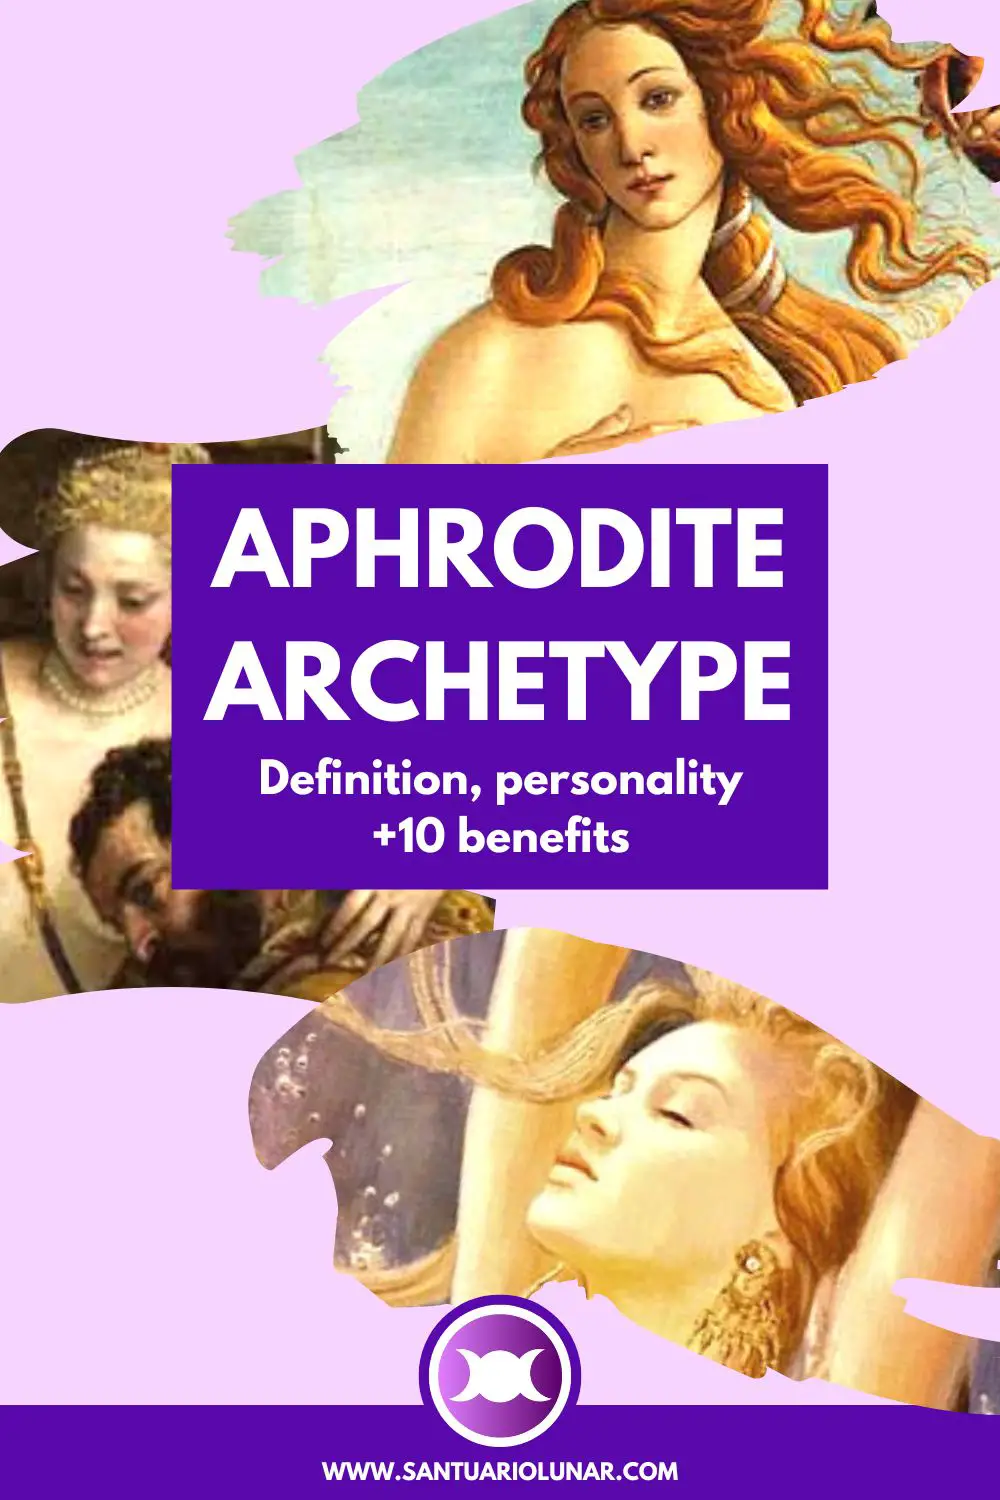 Aphrodite Archetype and Personality